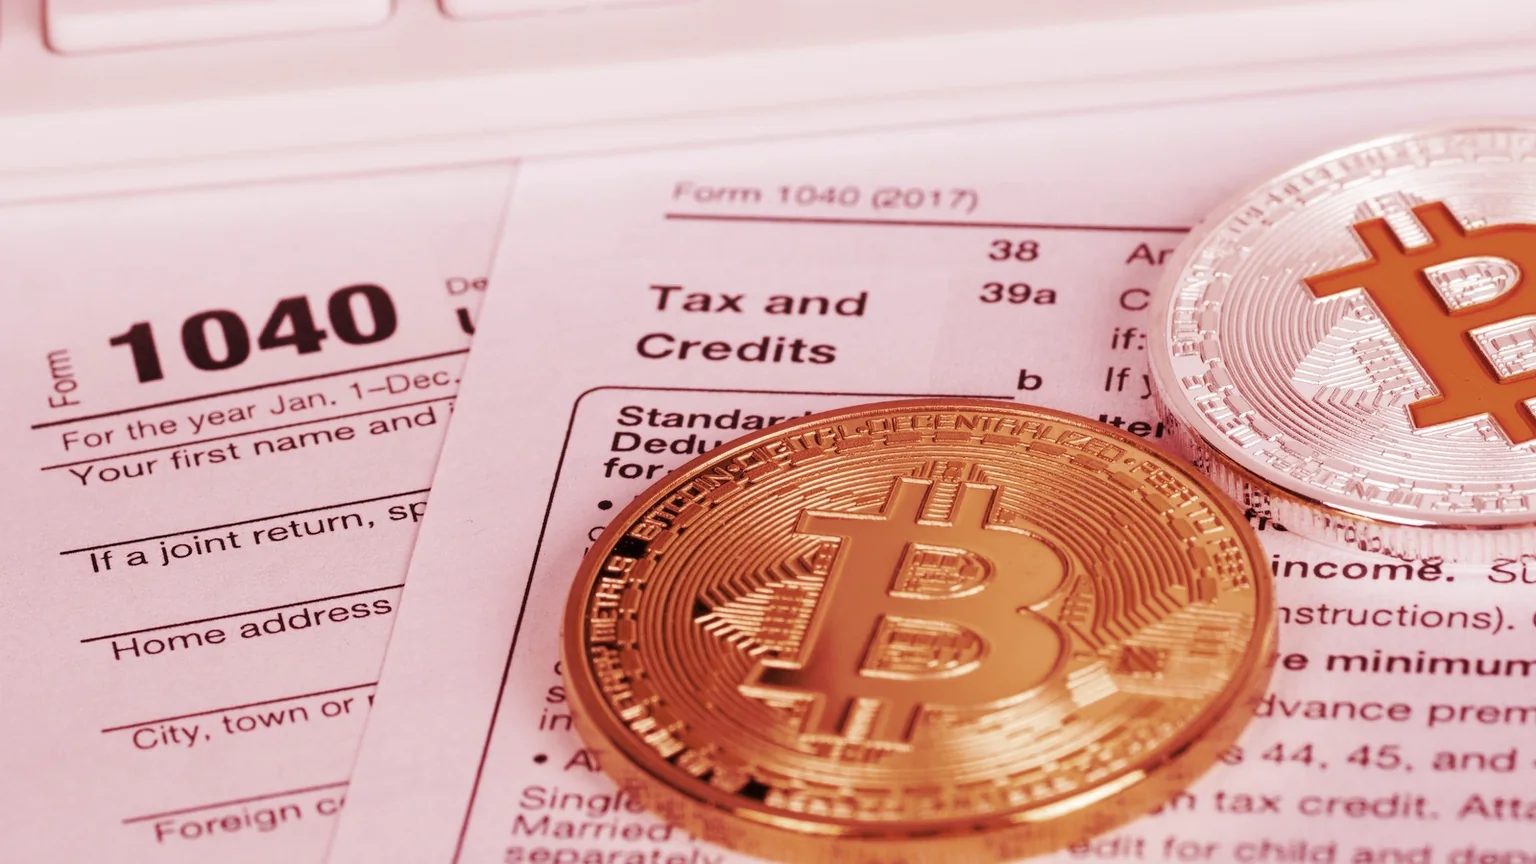 Filing your crypto taxes. IMAGE: Shutterstock